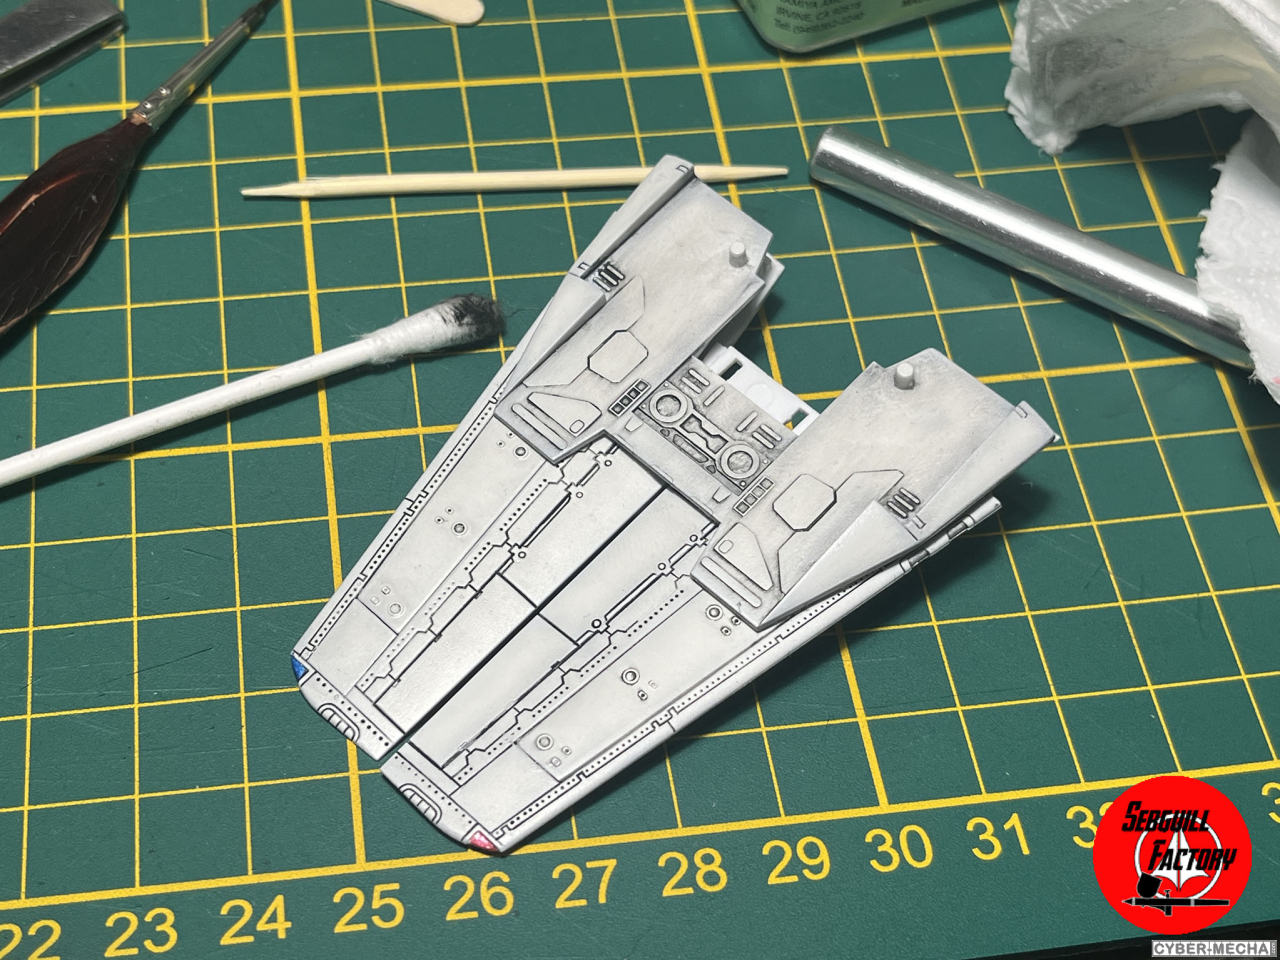 [Hasegawa] 1/72 - VF-1j Armored valkyrie  - Page 3 1708882662